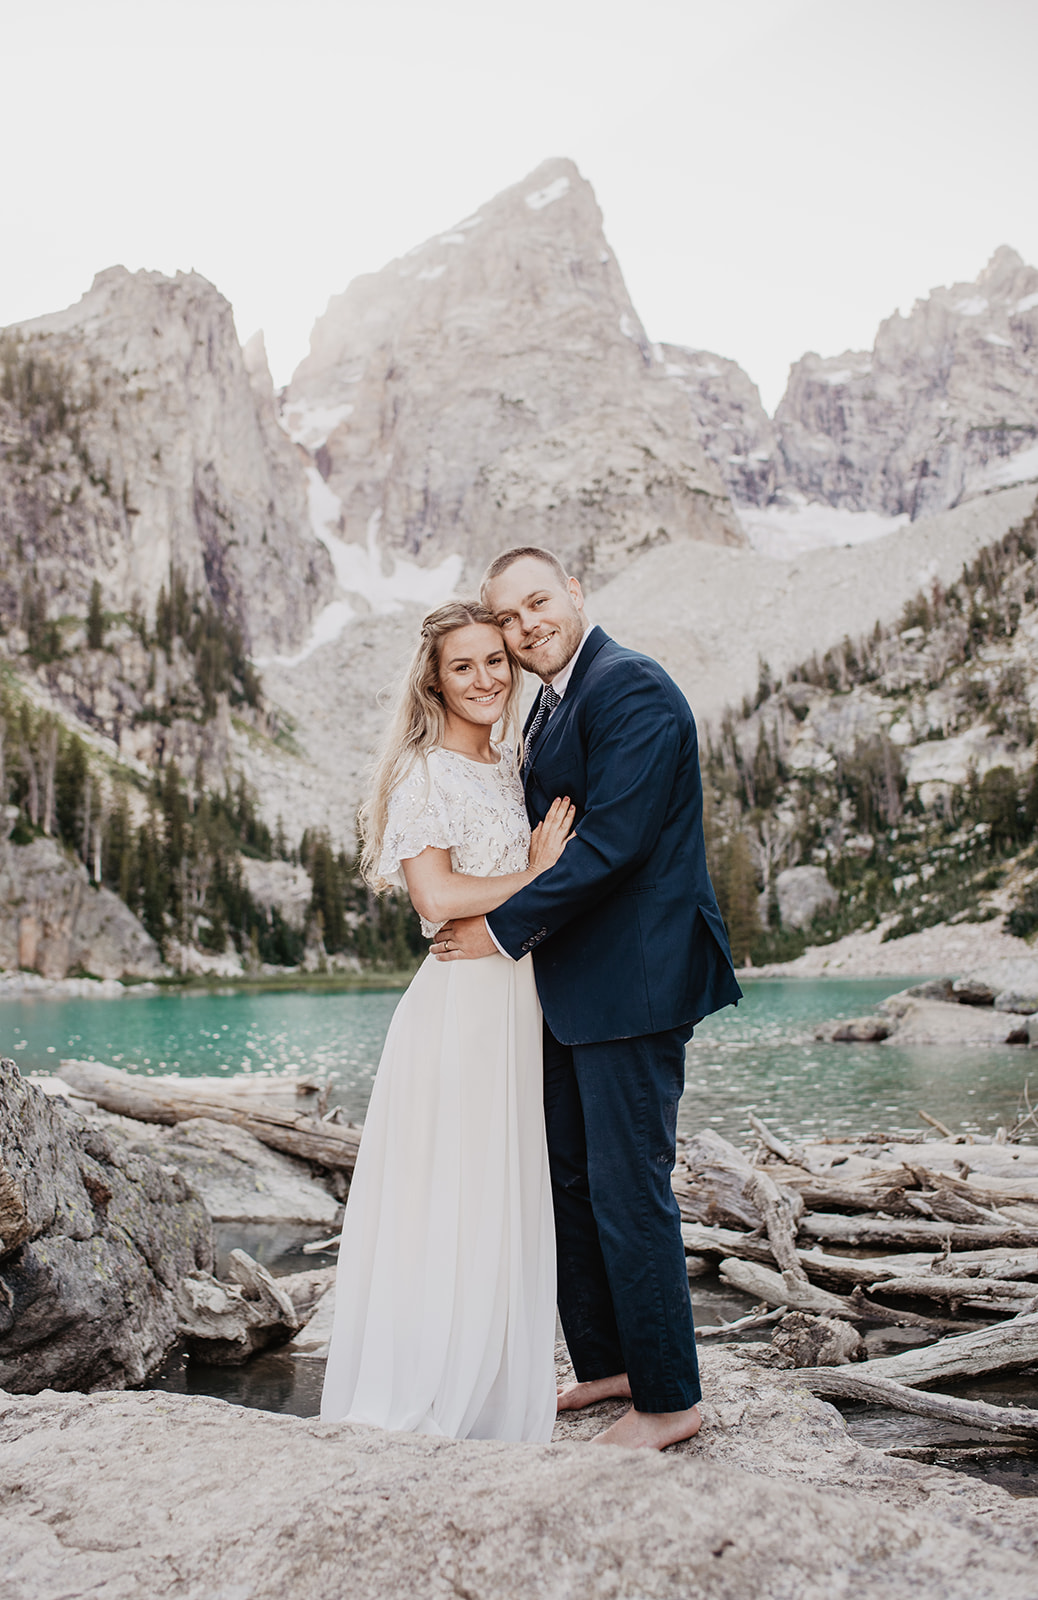 Jackson Hole wedding picture with bride and groom embracing in front of the Tetons for their Grand Teton wedding